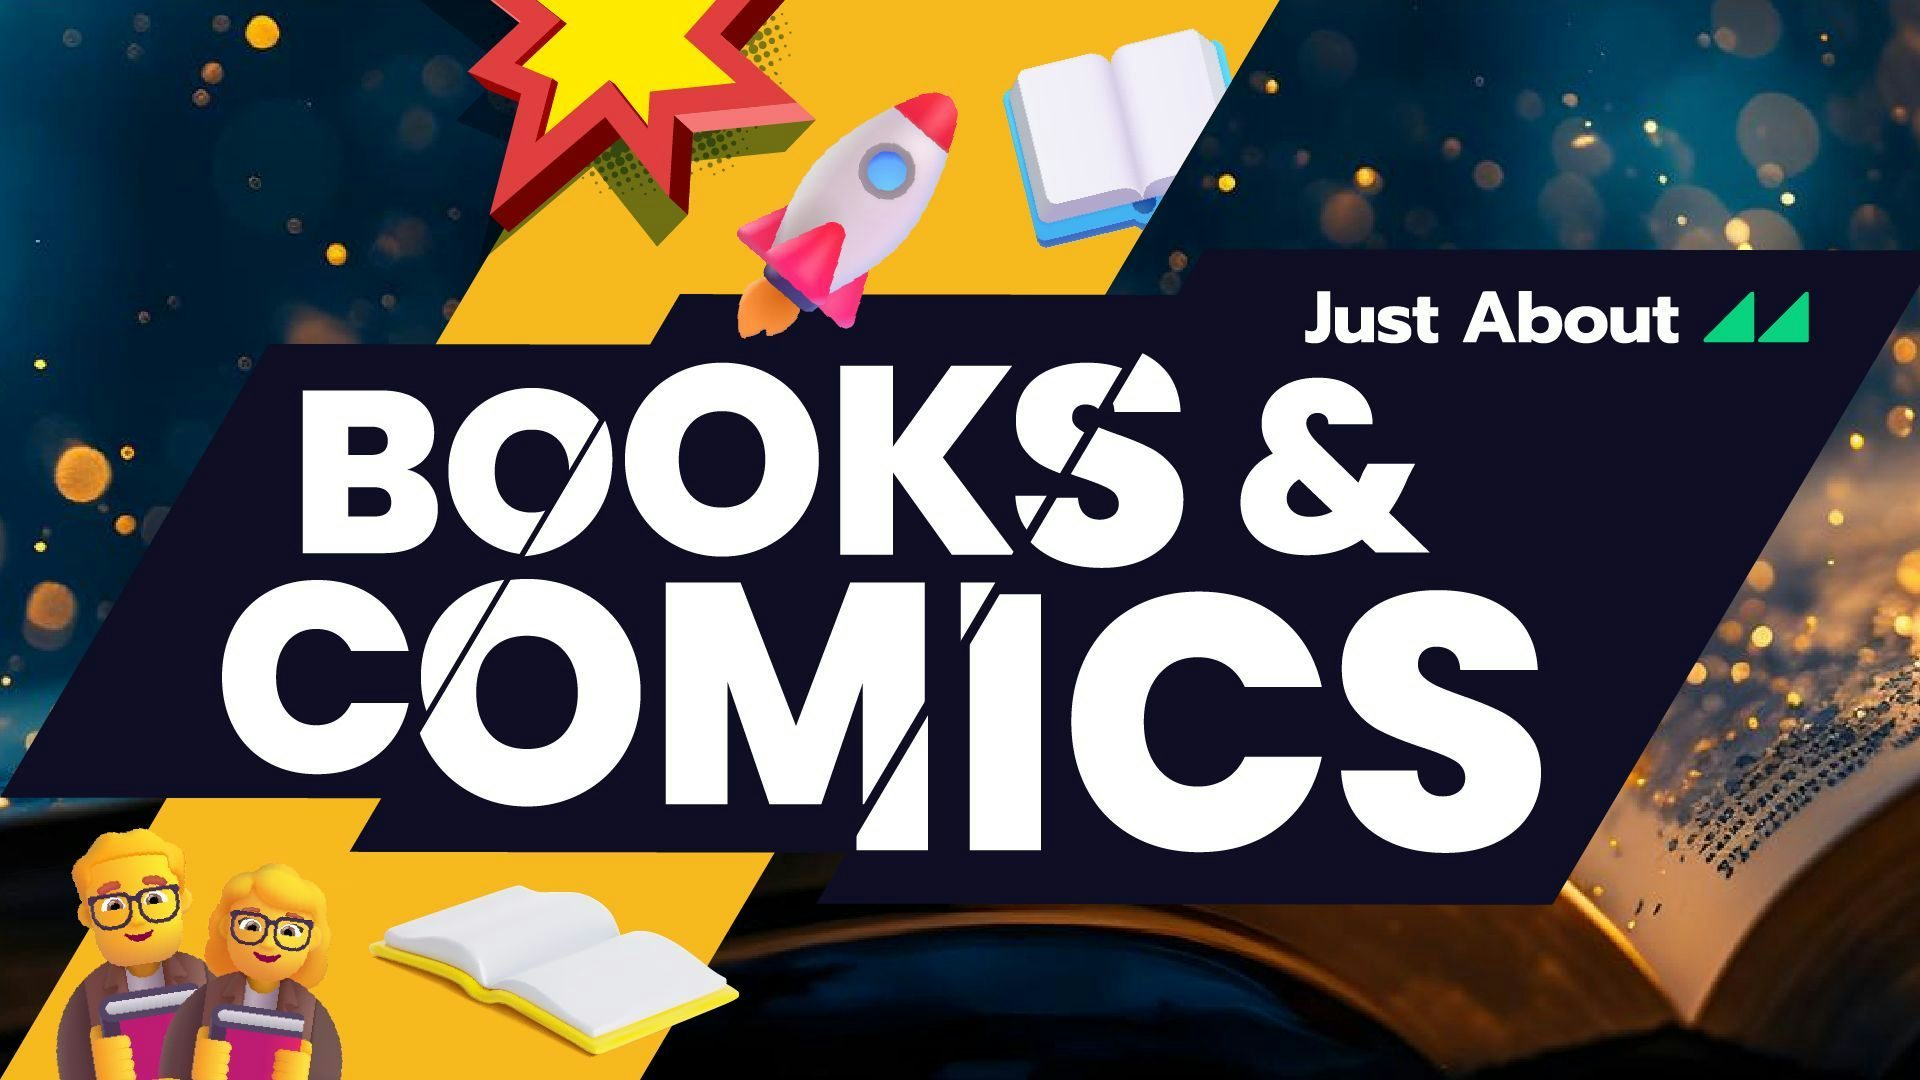 Welcome to Just About Books & Comics